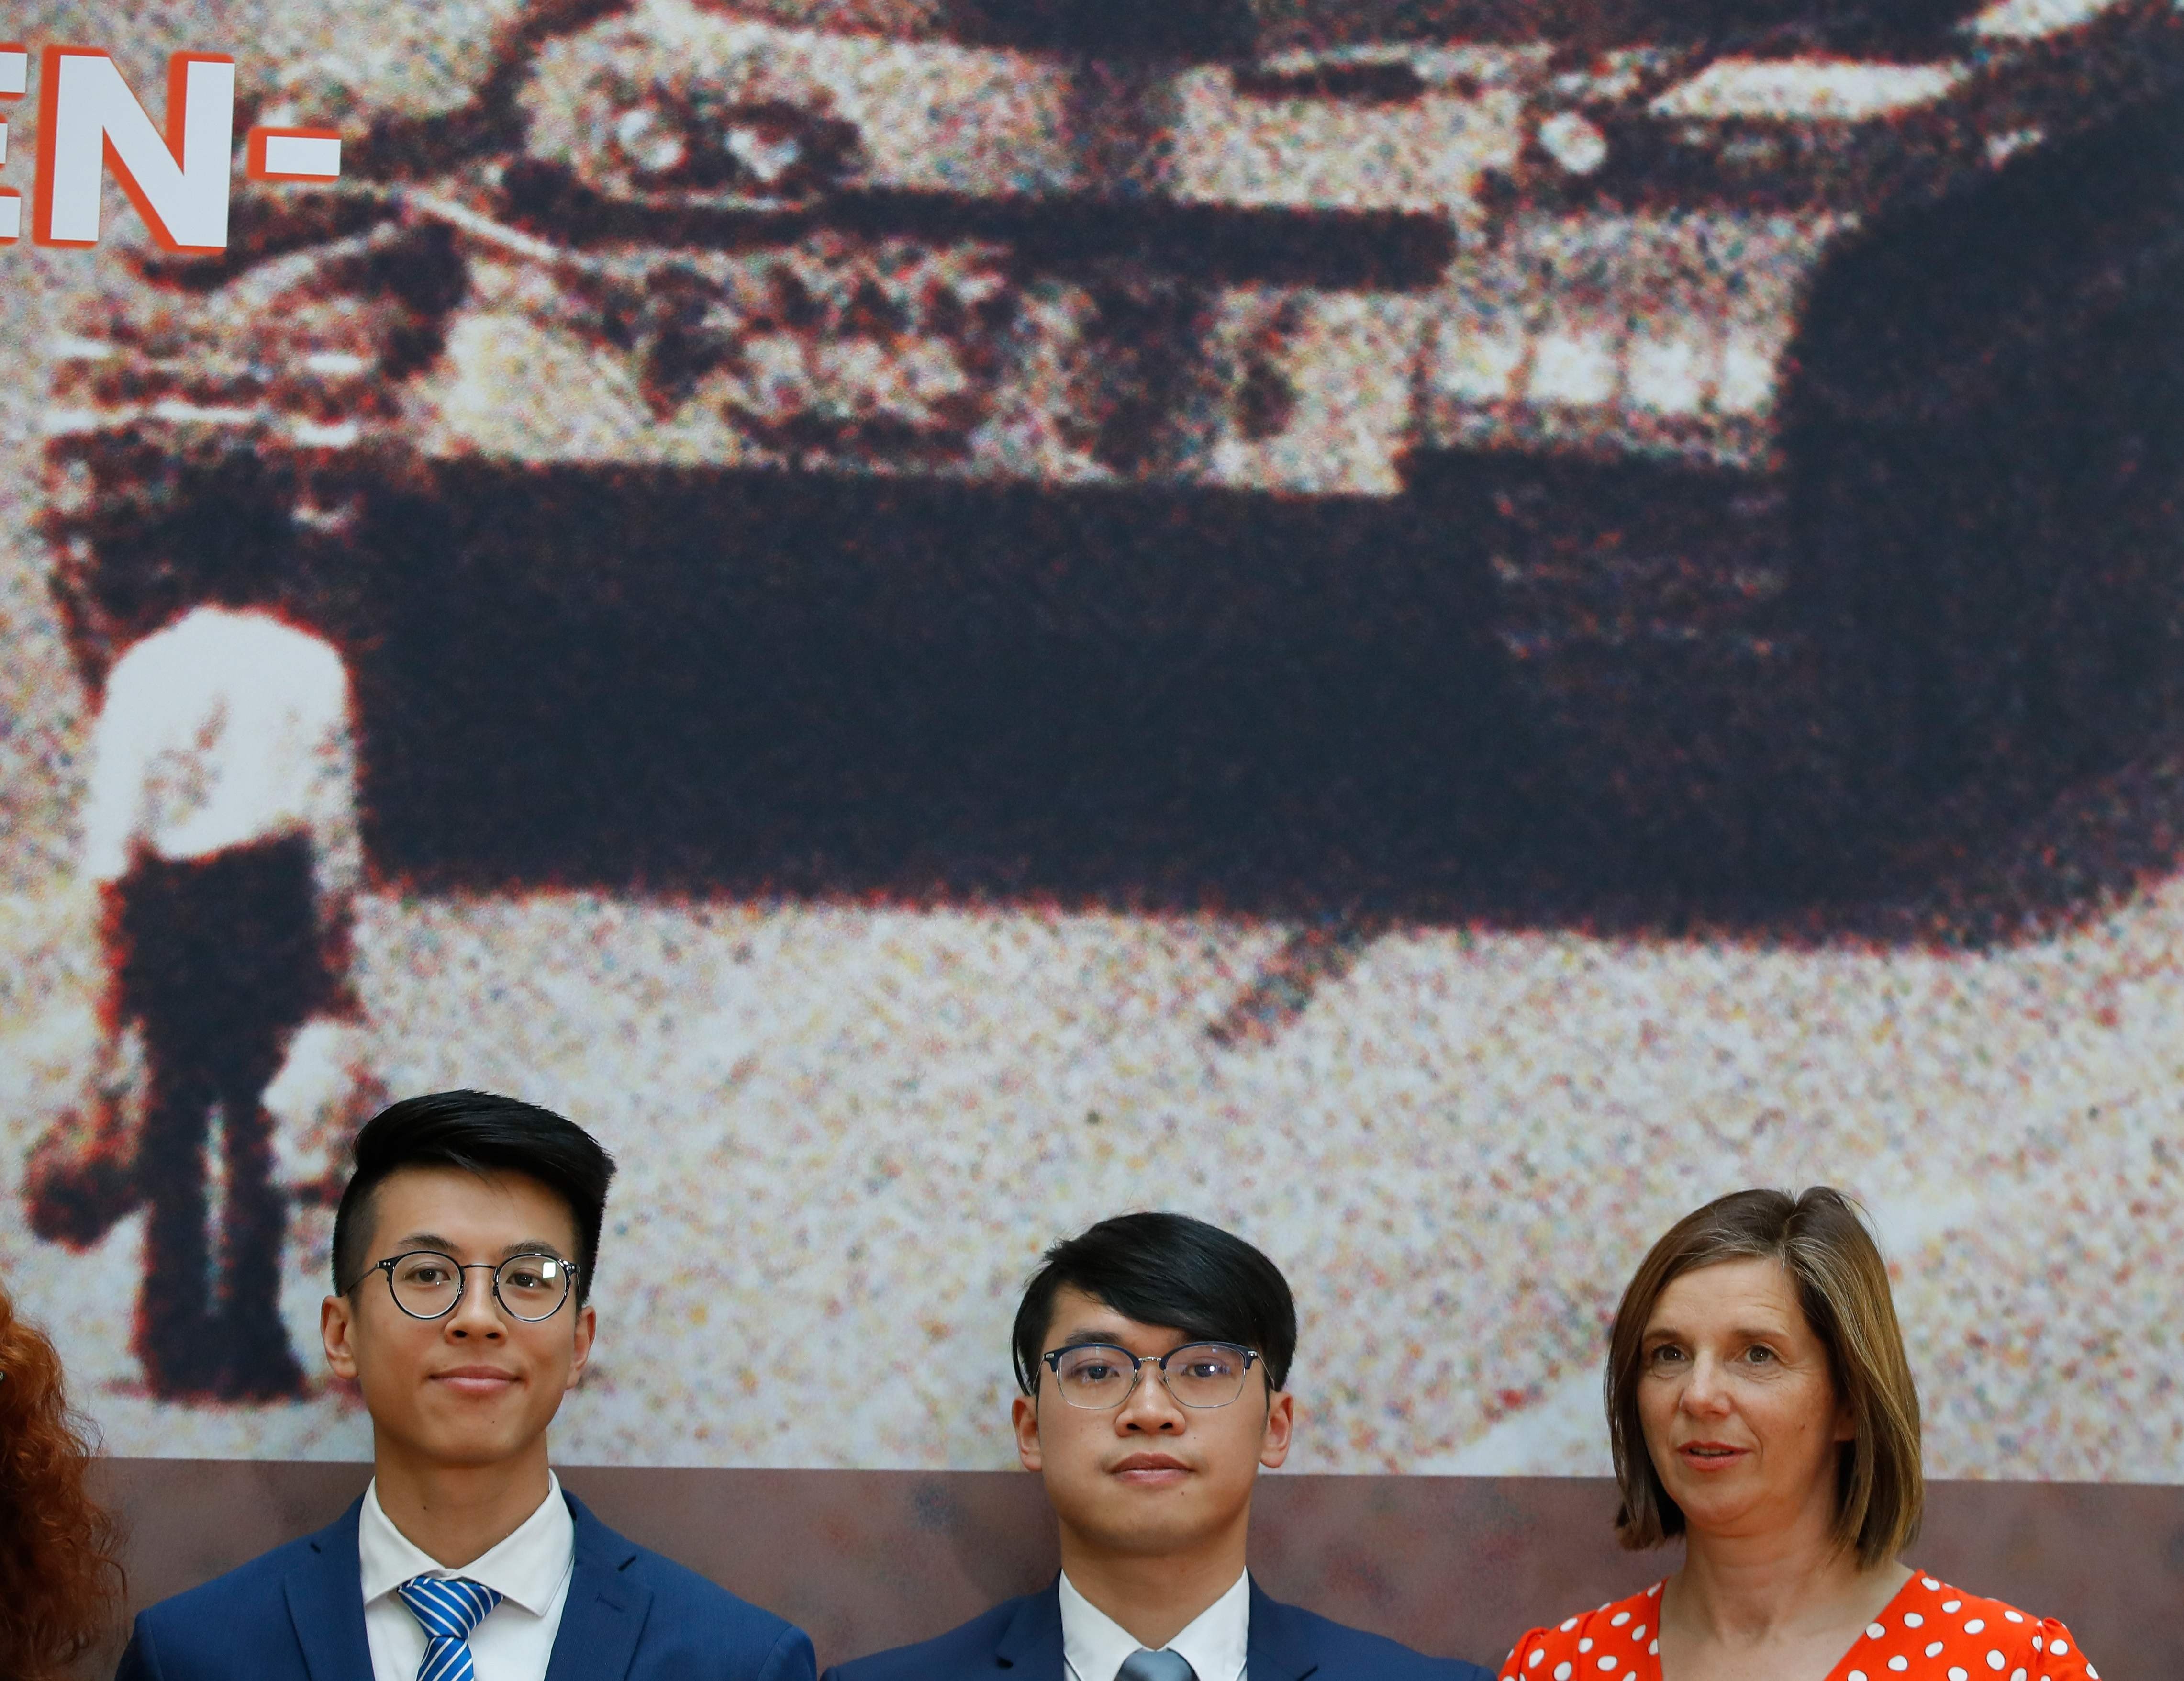 Ray Wong and Alan Li, two activists from Hong Kong who are under refugee protection in Germany, pose with politician Katrin Goering-Eckart at an event in Berlin on June 4, marking the 30th anniversary of the Tiananmen crackdown. In the background is the iconic “Tank Man” photo. Photo: AFP